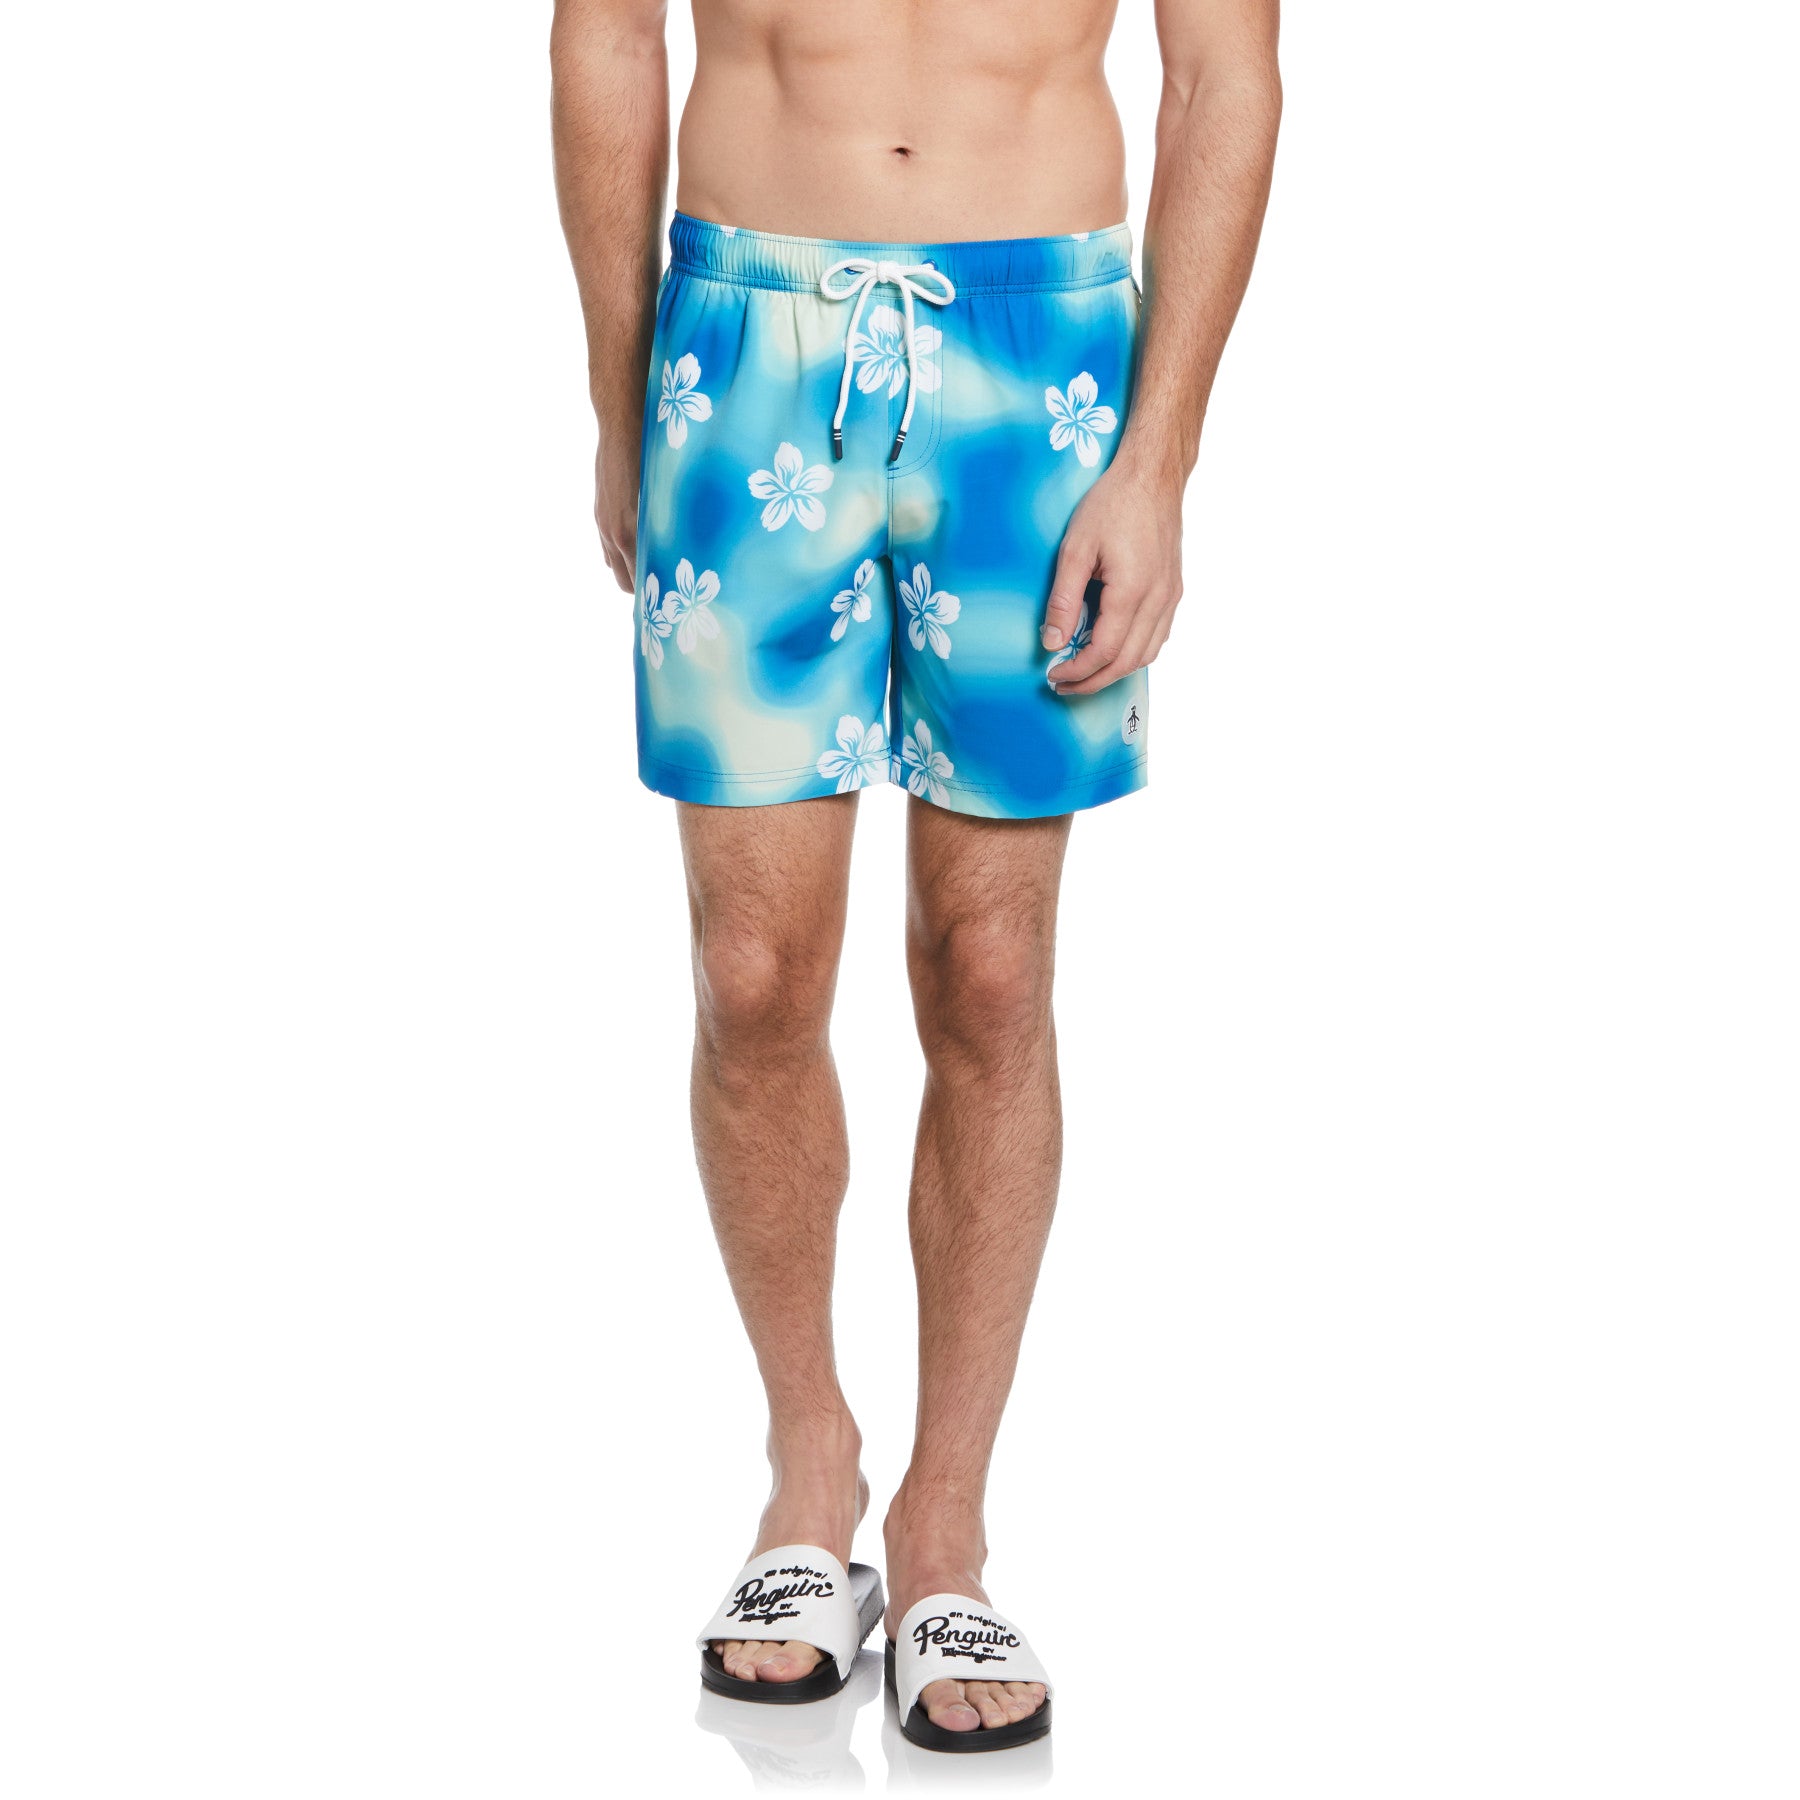 View Watercolor Floral Print Swim Short In Imperial Blue information